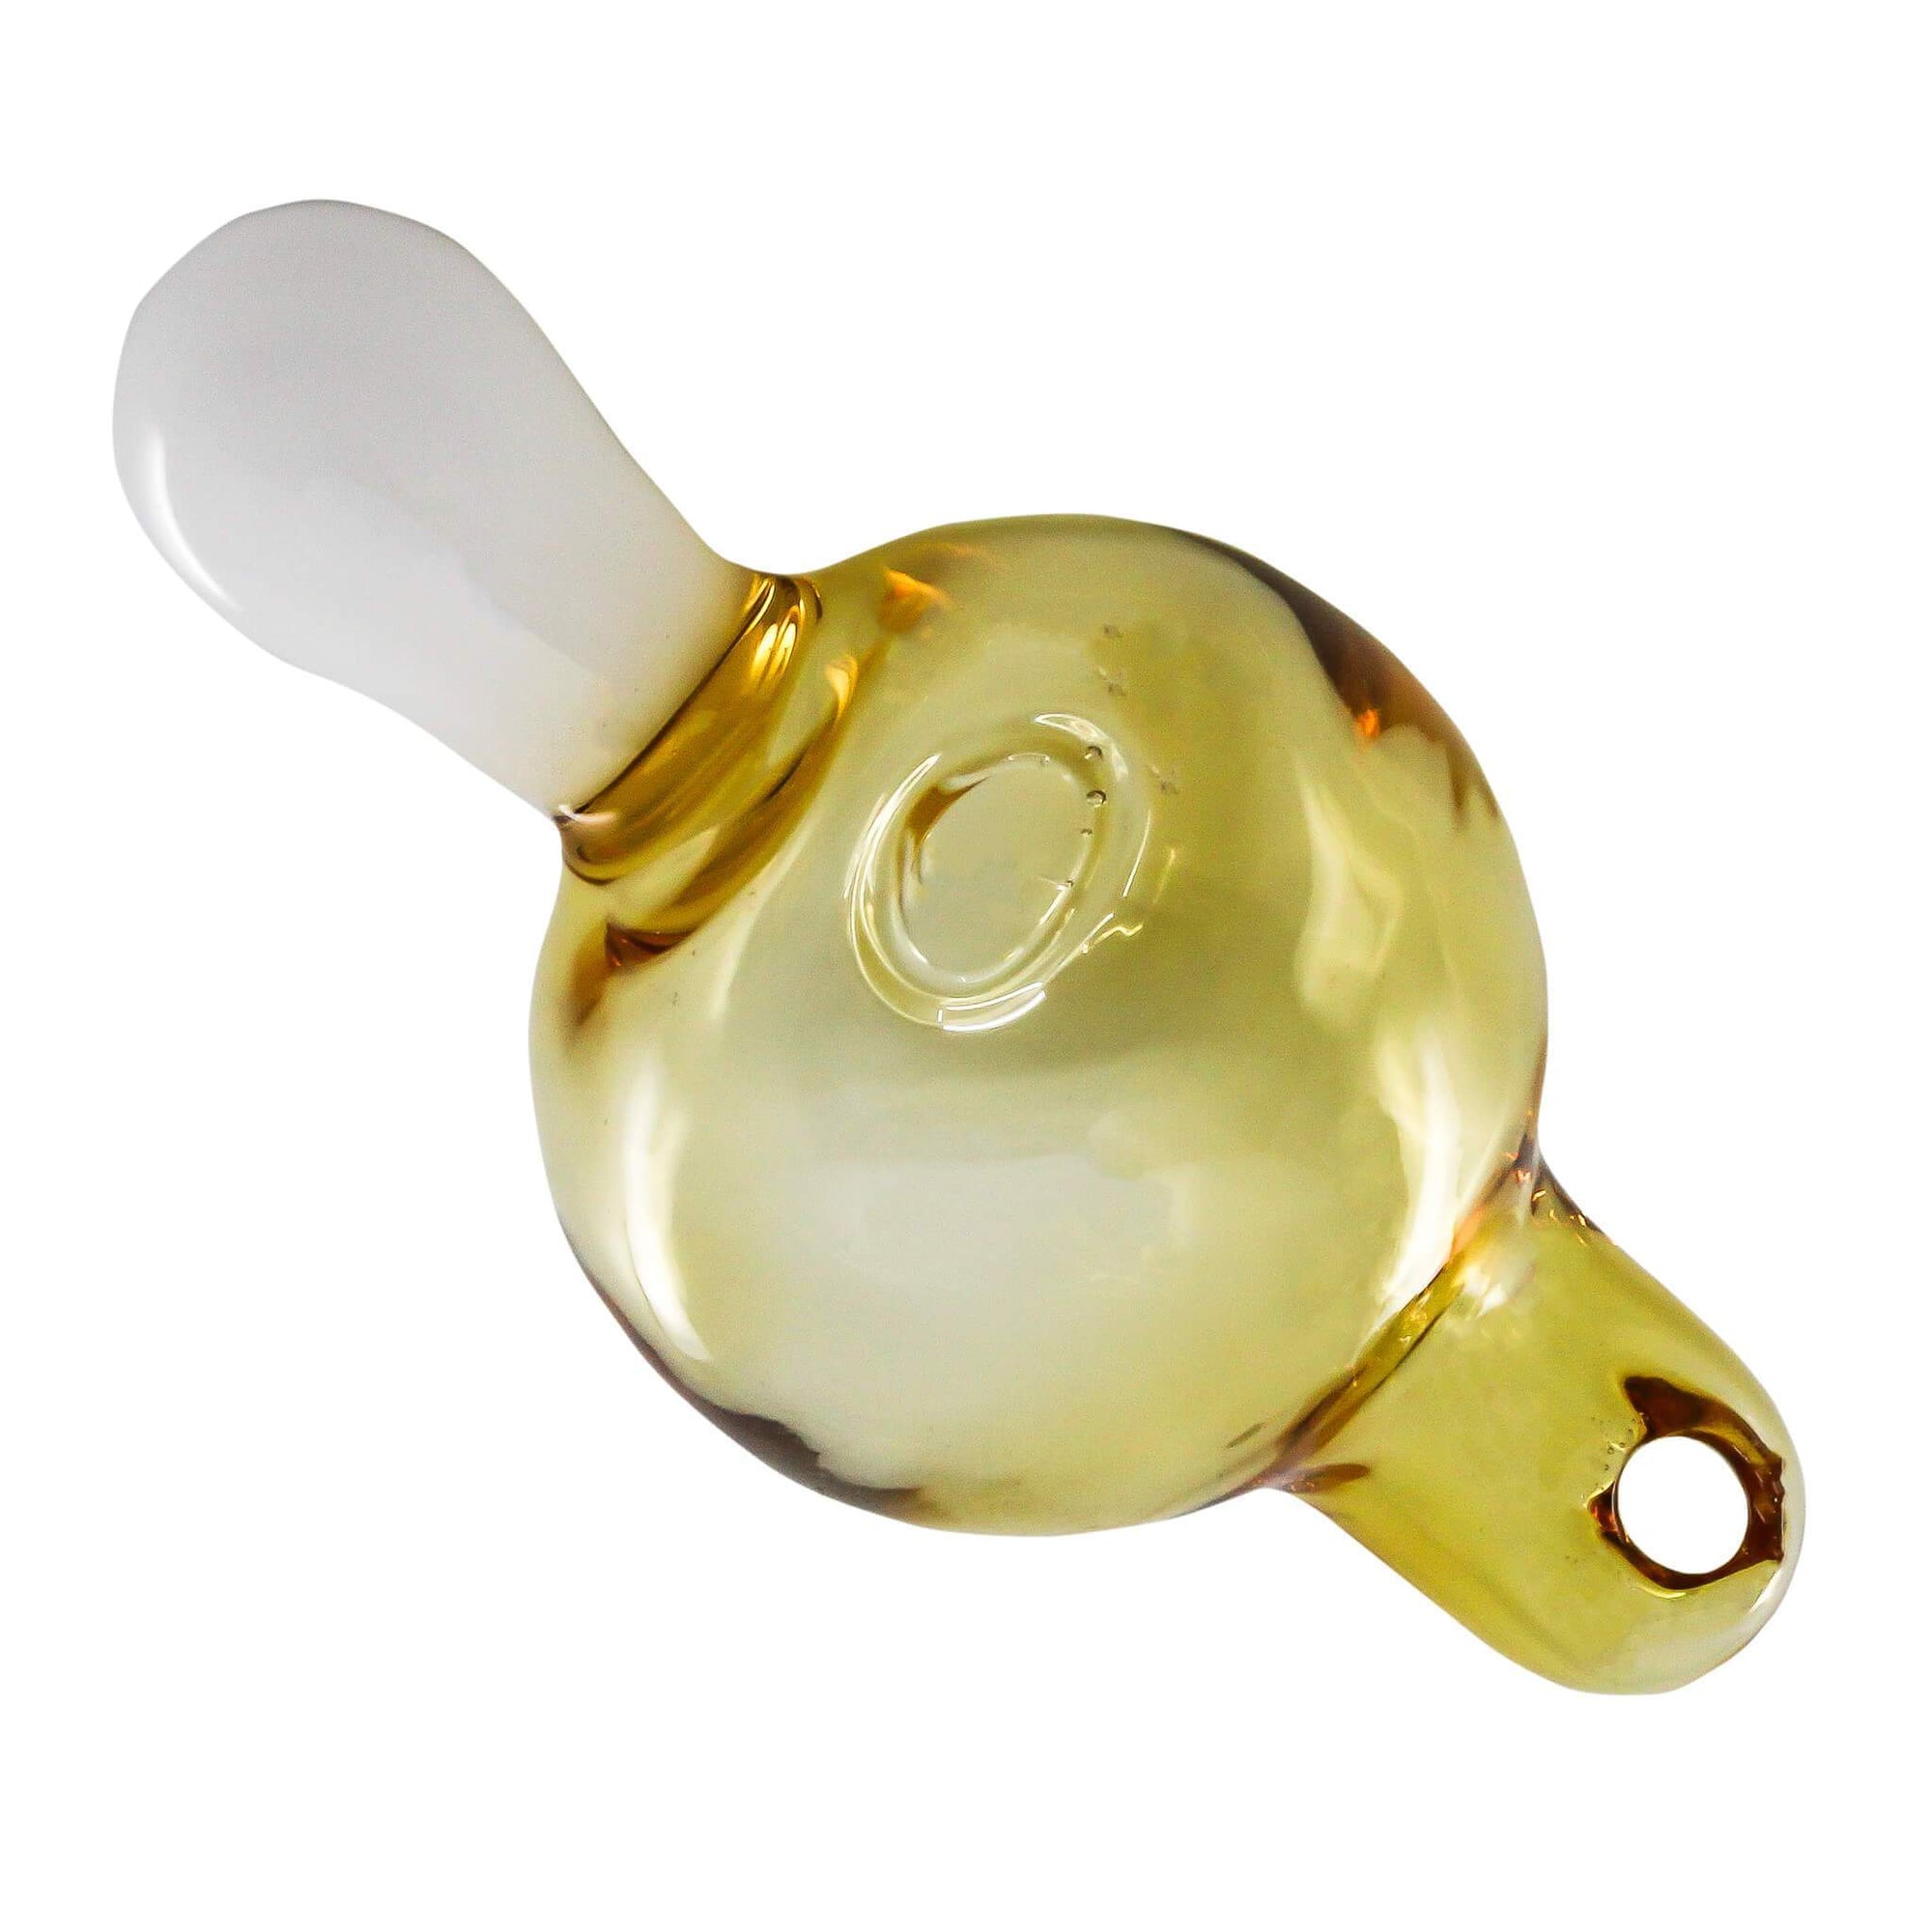 20mm Cold Start Banger Combo Pack | Yellow View | the dabbing specialists